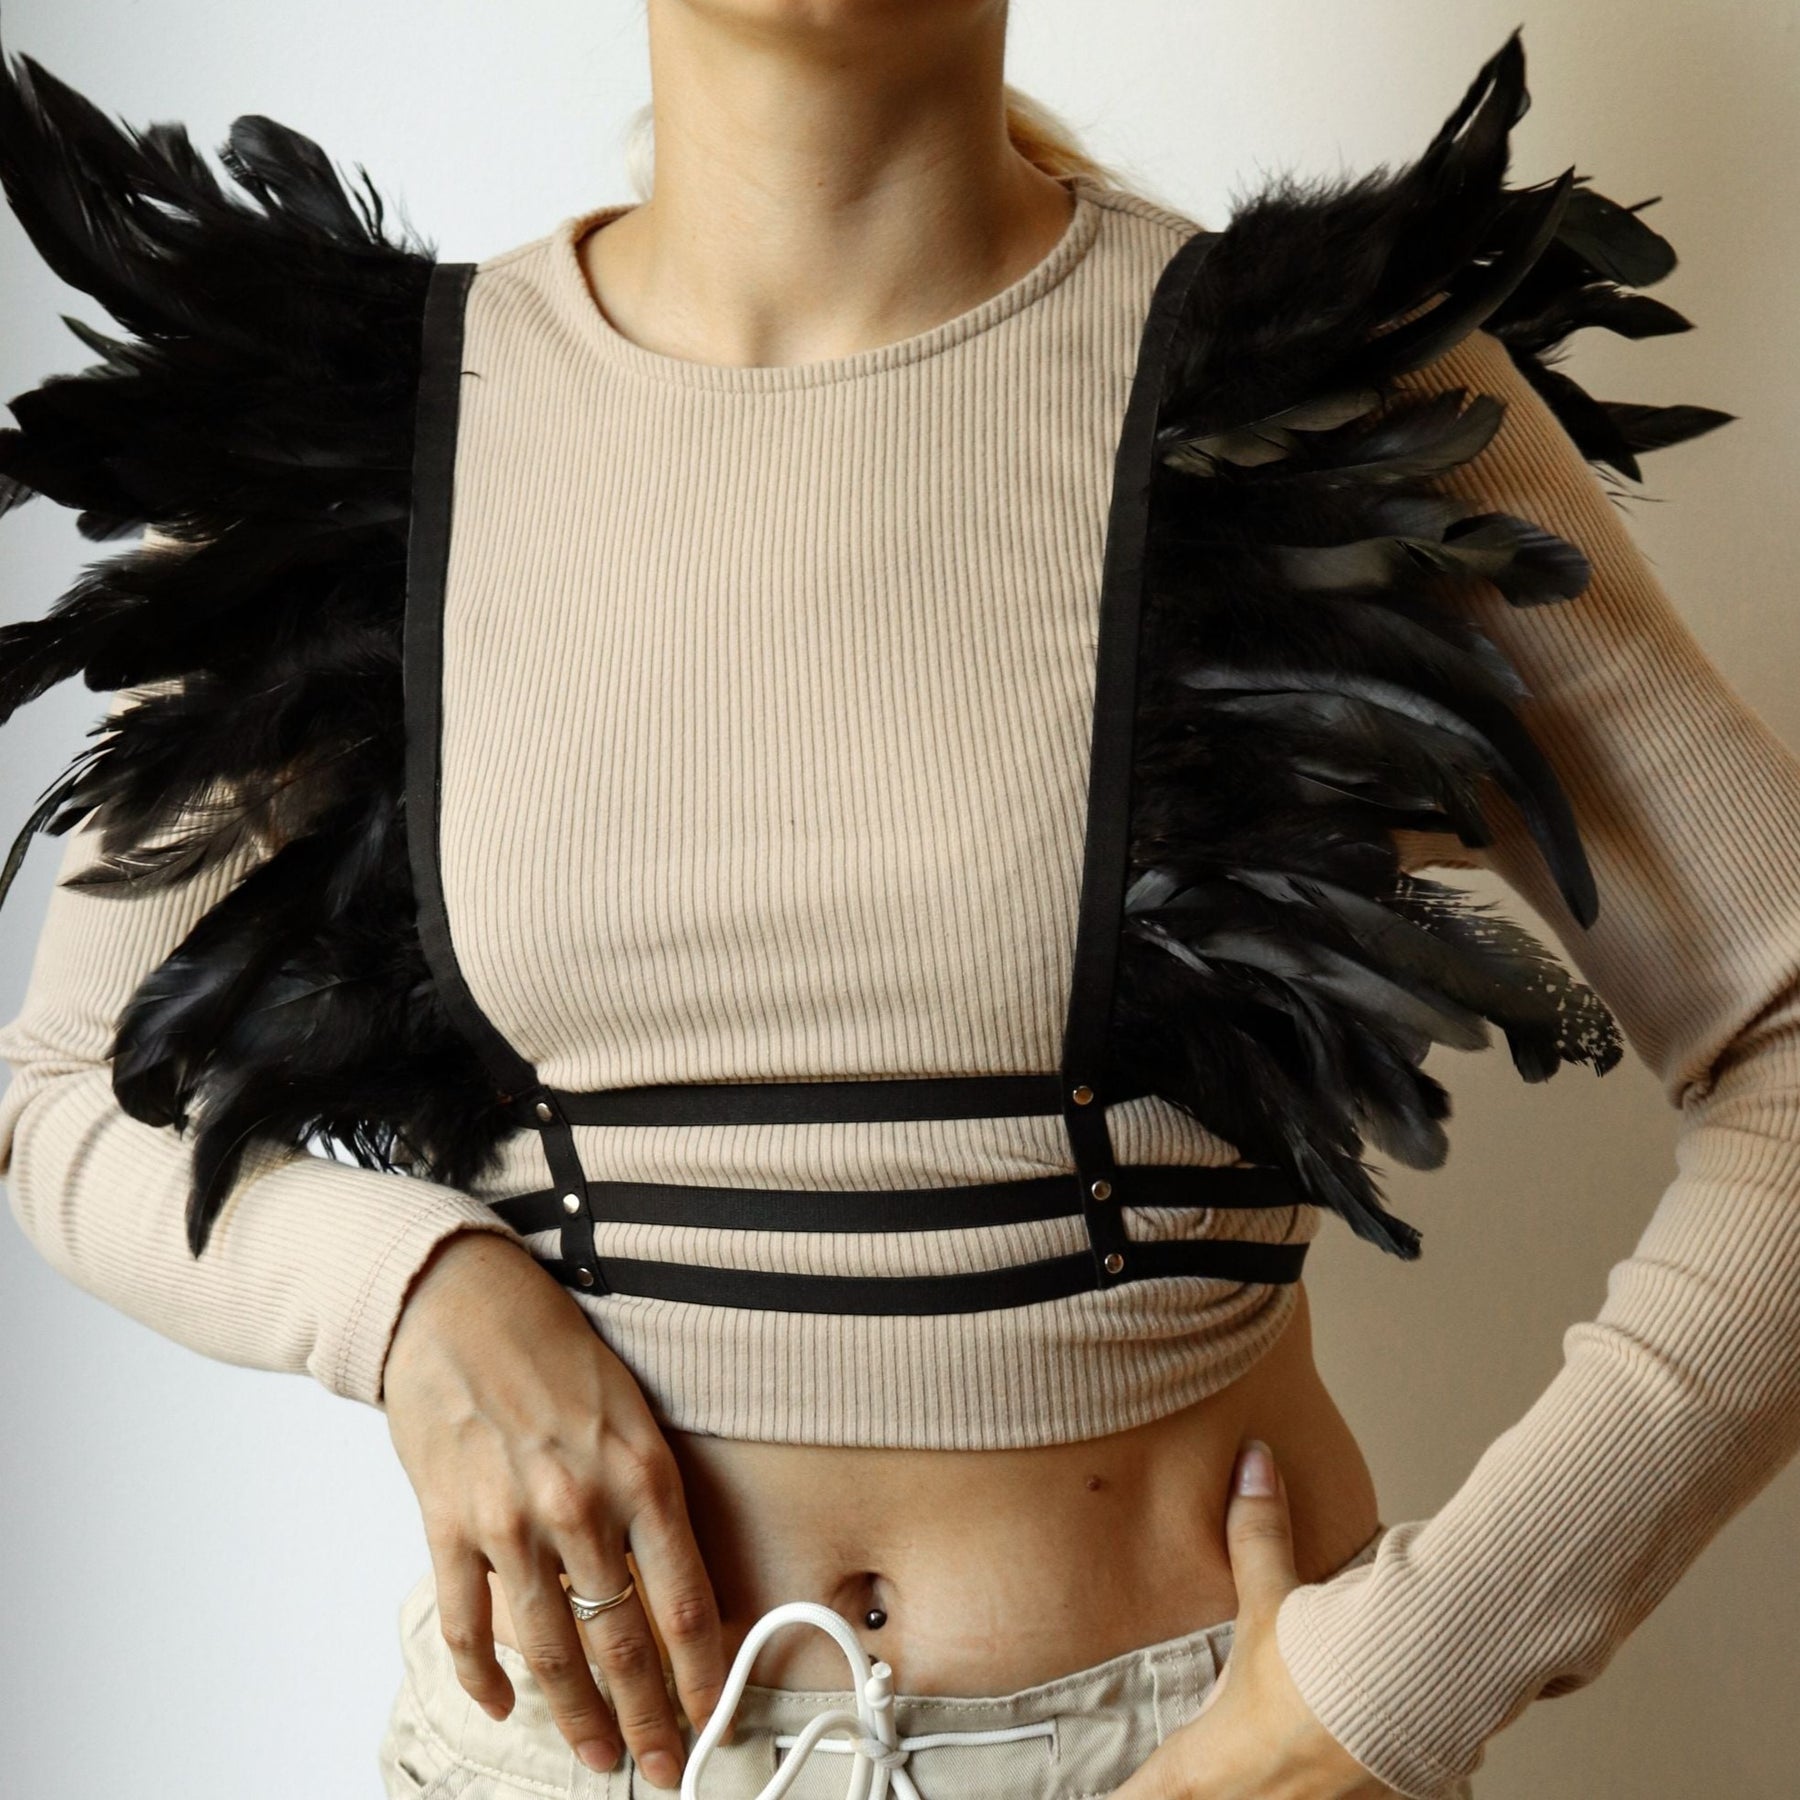 Feather Harness Top, White Lace Feather Bra, Bralette With